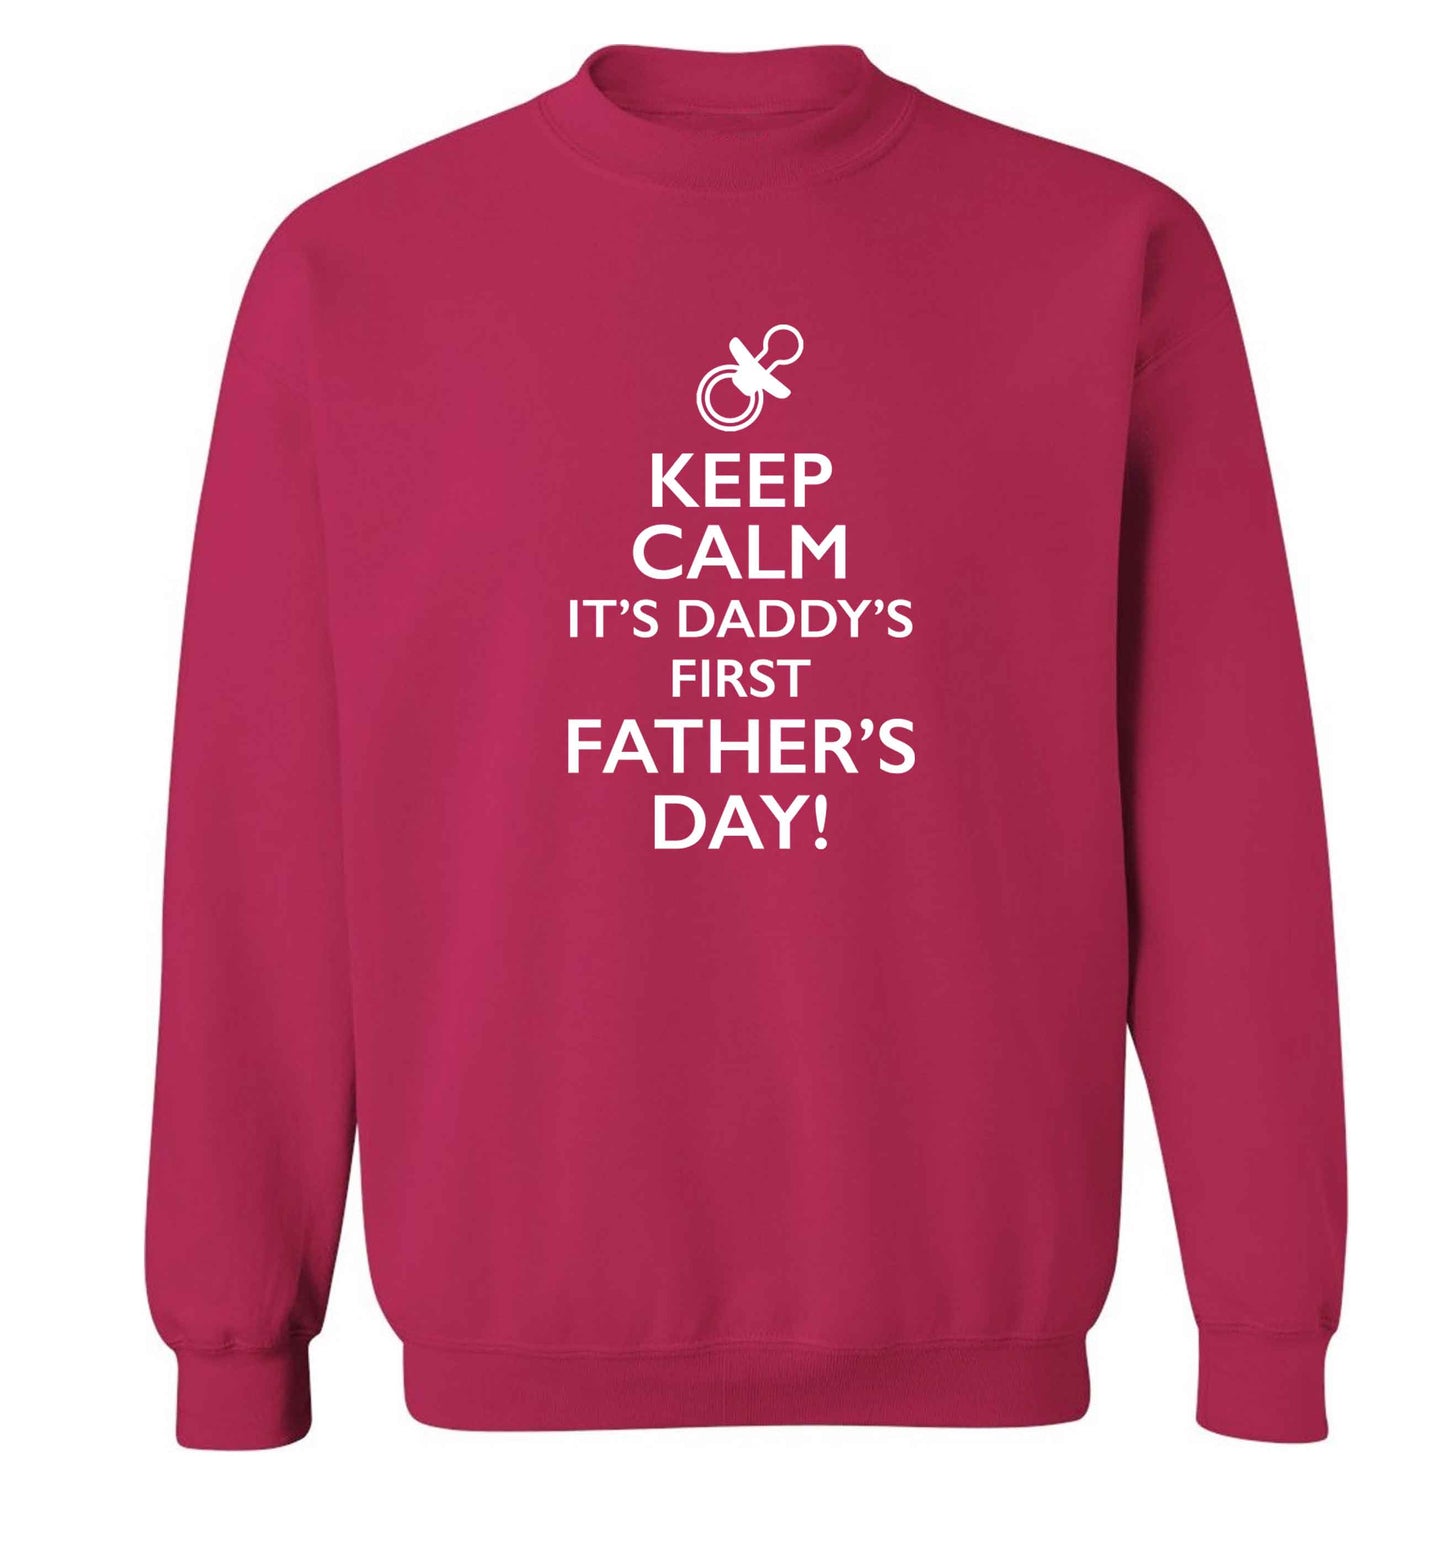 Keep calm it's daddys first father's day adult's unisex pink sweater 2XL